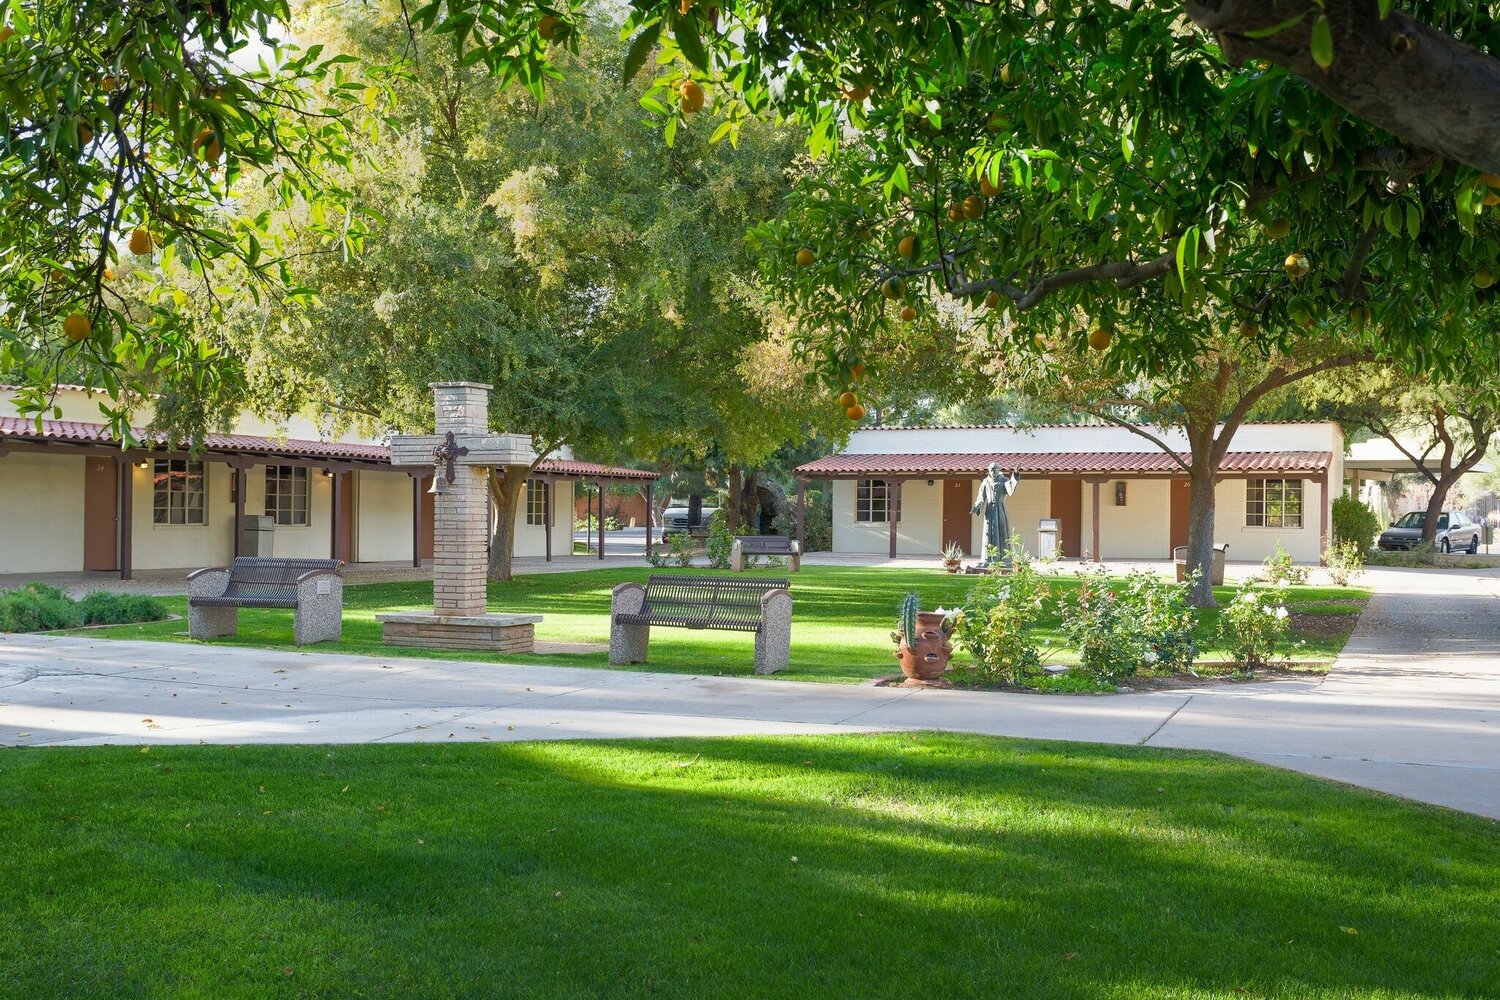 The Franciscan Renewal Center was founded by the Order of Friars Minor in 1951 and works cooperatively with the Diocese of Phoenix.